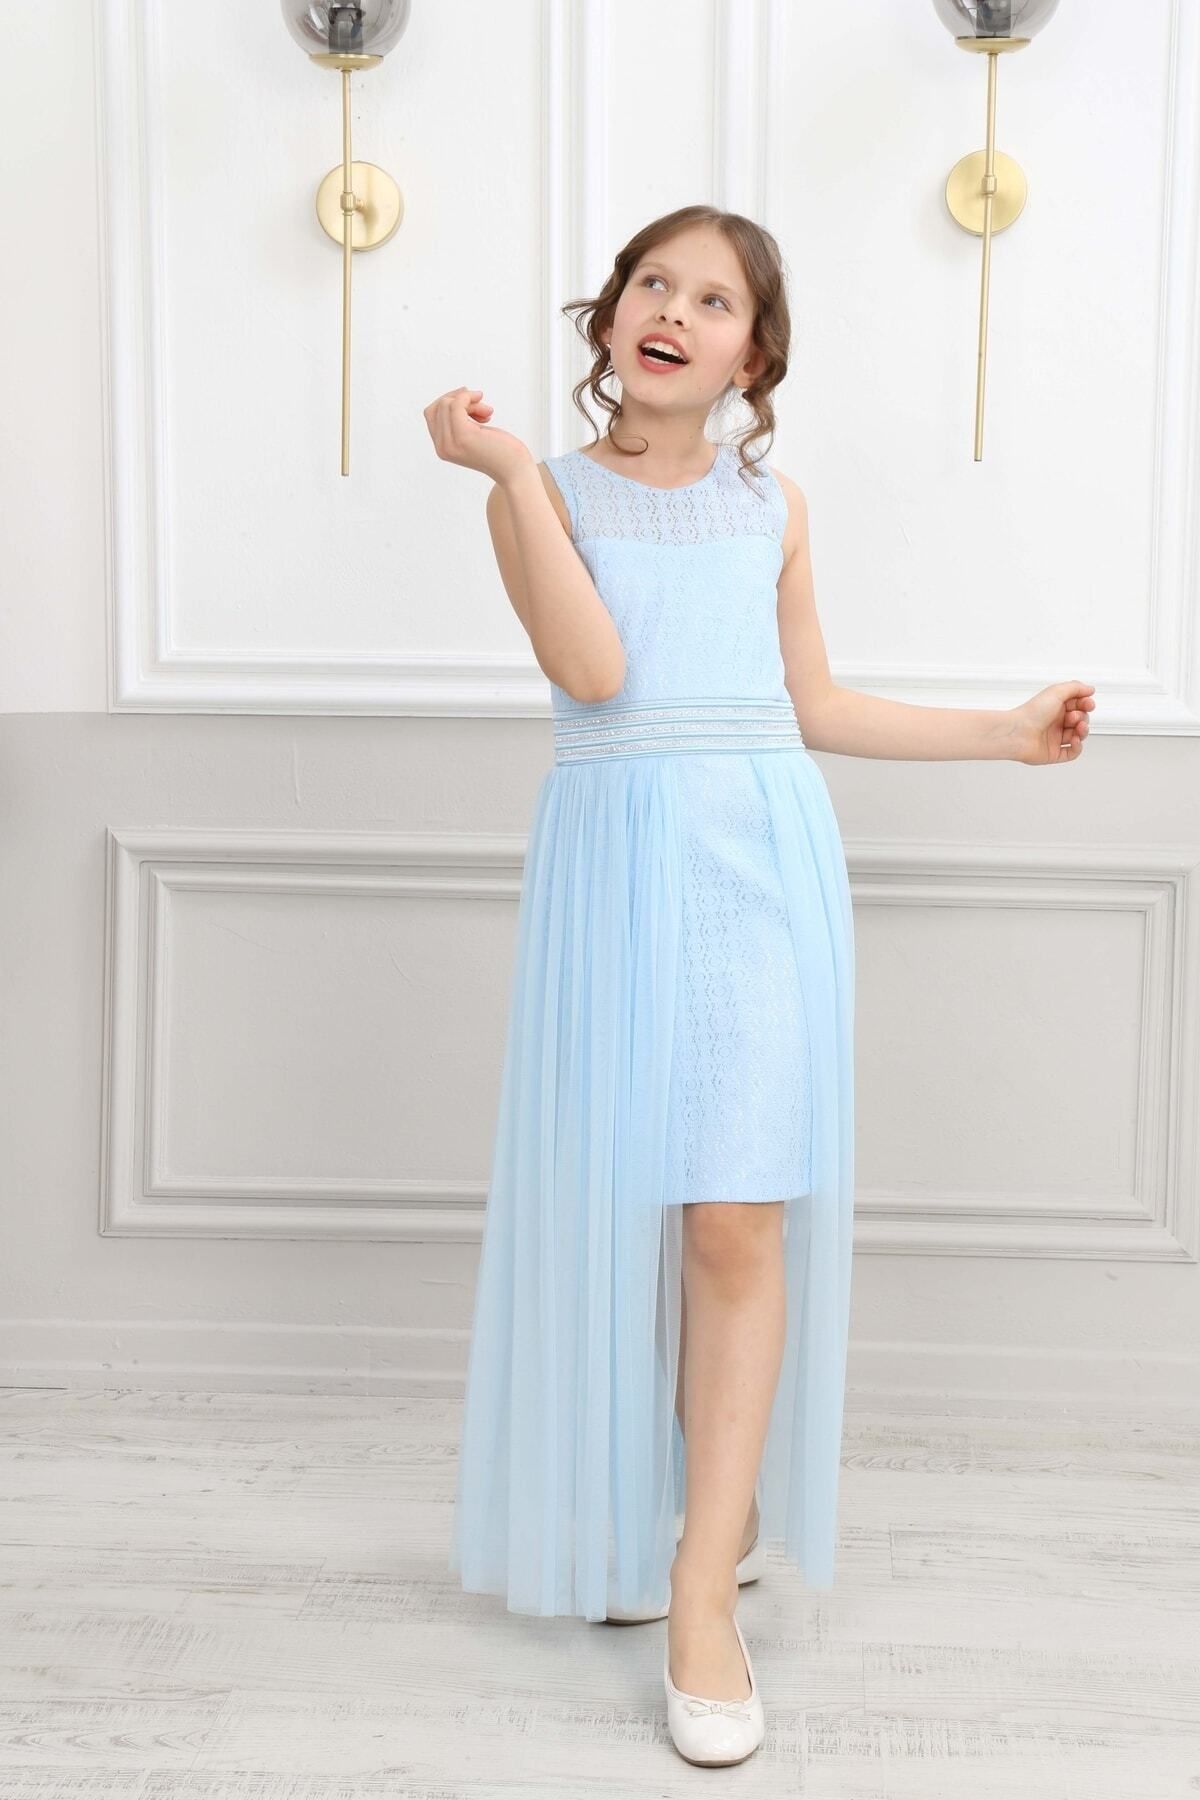 Amazon.com: Girls Teen Christmas Holiday Party Wedding Dress Children  Floral Sleeveless Bridesmaid Gown 4-10 Years Old (5-6 Years Old, Green):  Clothing, Shoes & Jewelry